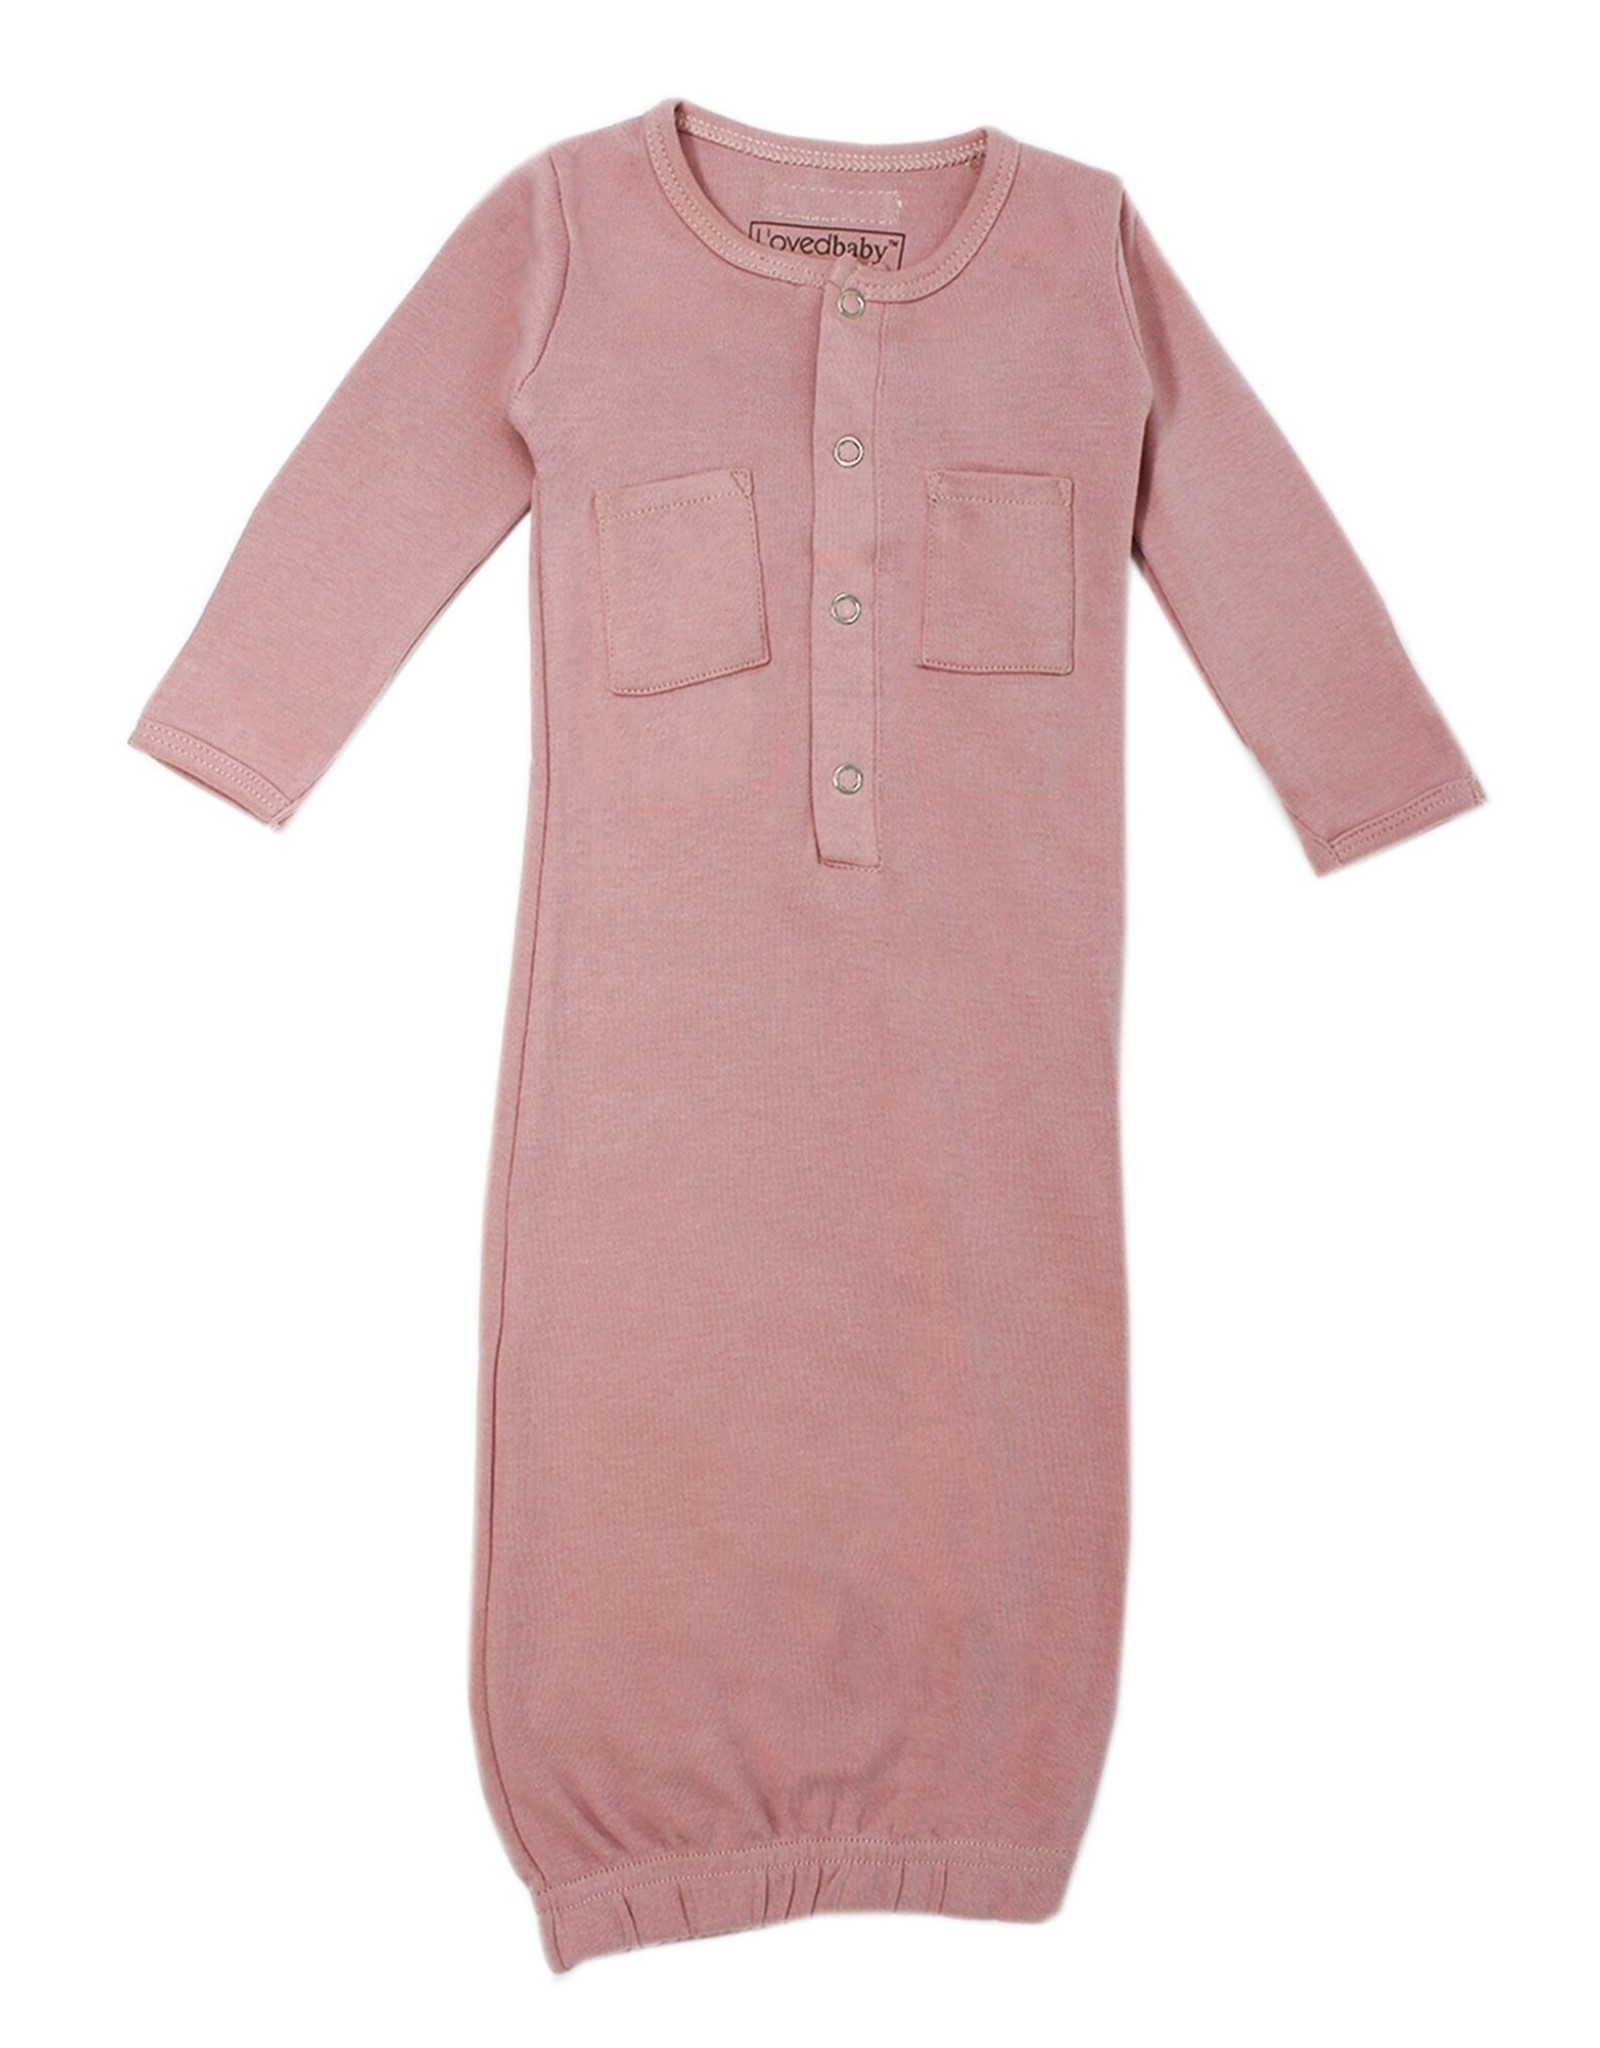 L'oved Baby Organic Cotton Baby Gown-Mauve